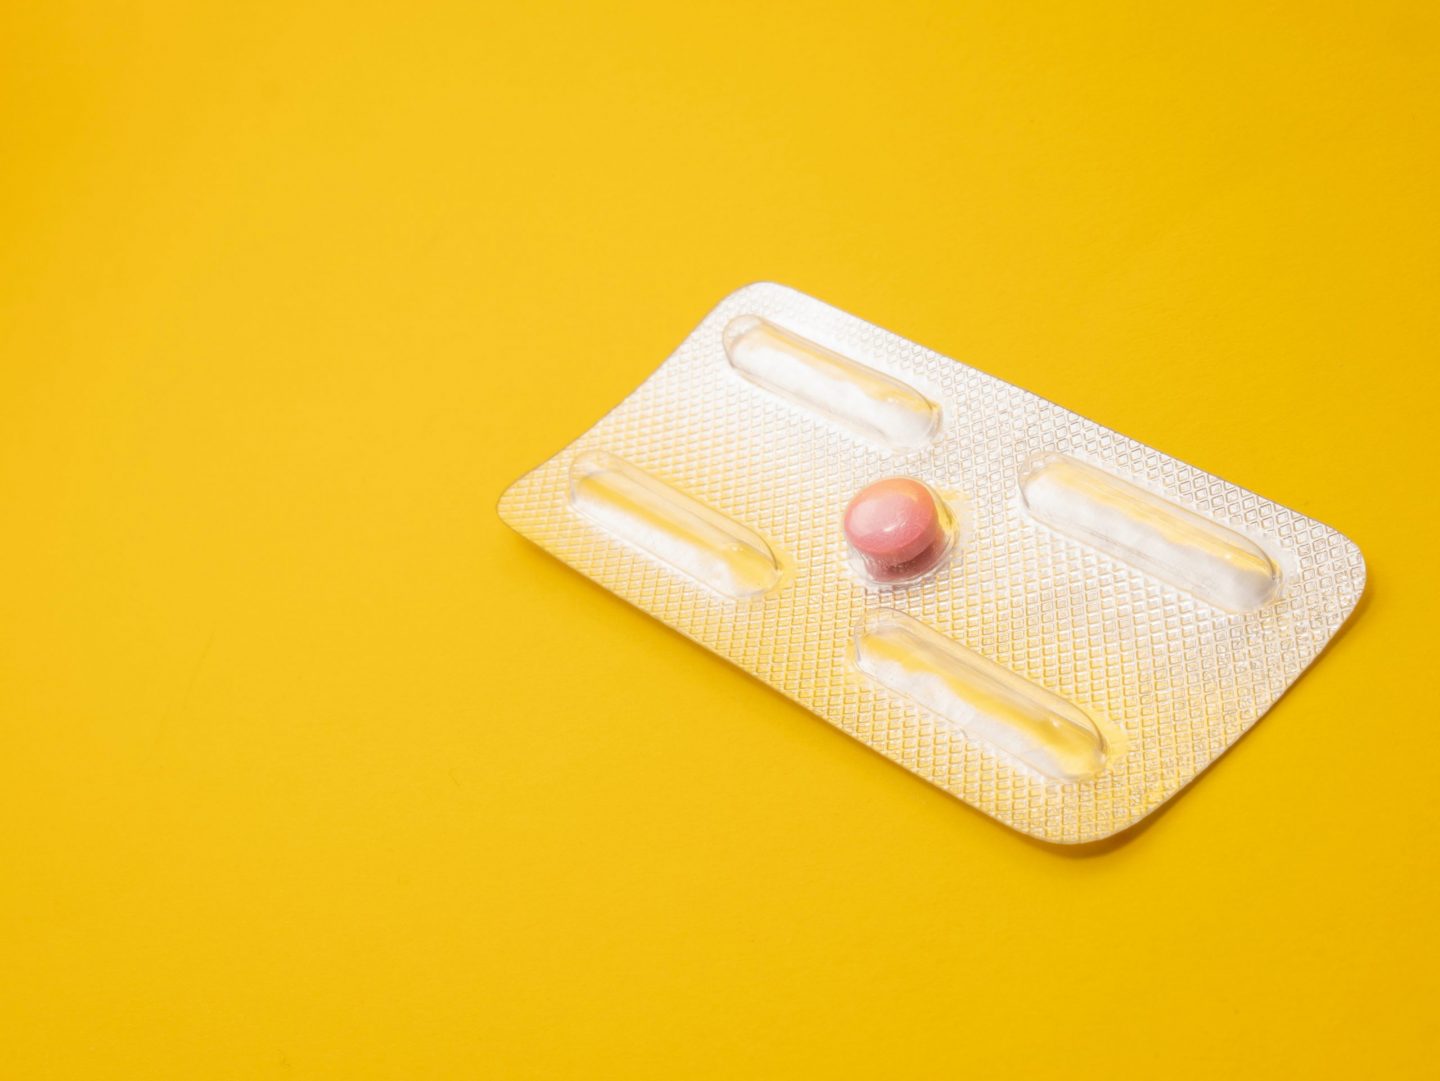 FDA Makes Clear Plan B Emergency Contraceptive Isn't for Abortion